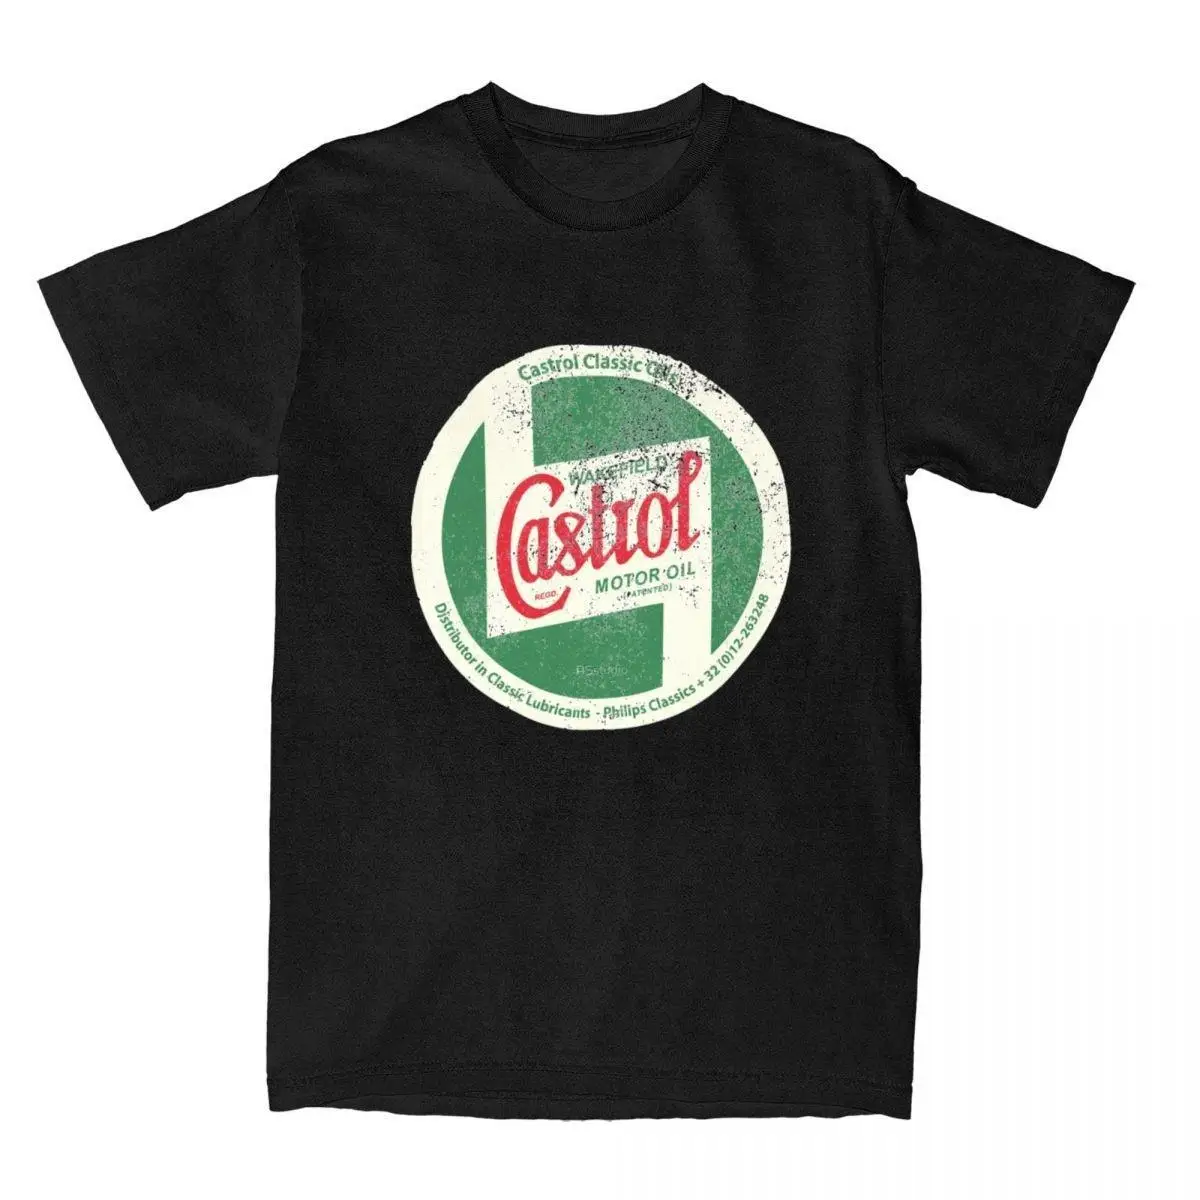 Men's T-Shirt Castrol Classic Vintage Sign Gas And Oil Casual Cotton Tee Shirt Short Sleeve T Shirts Crewneck Clothes Classic